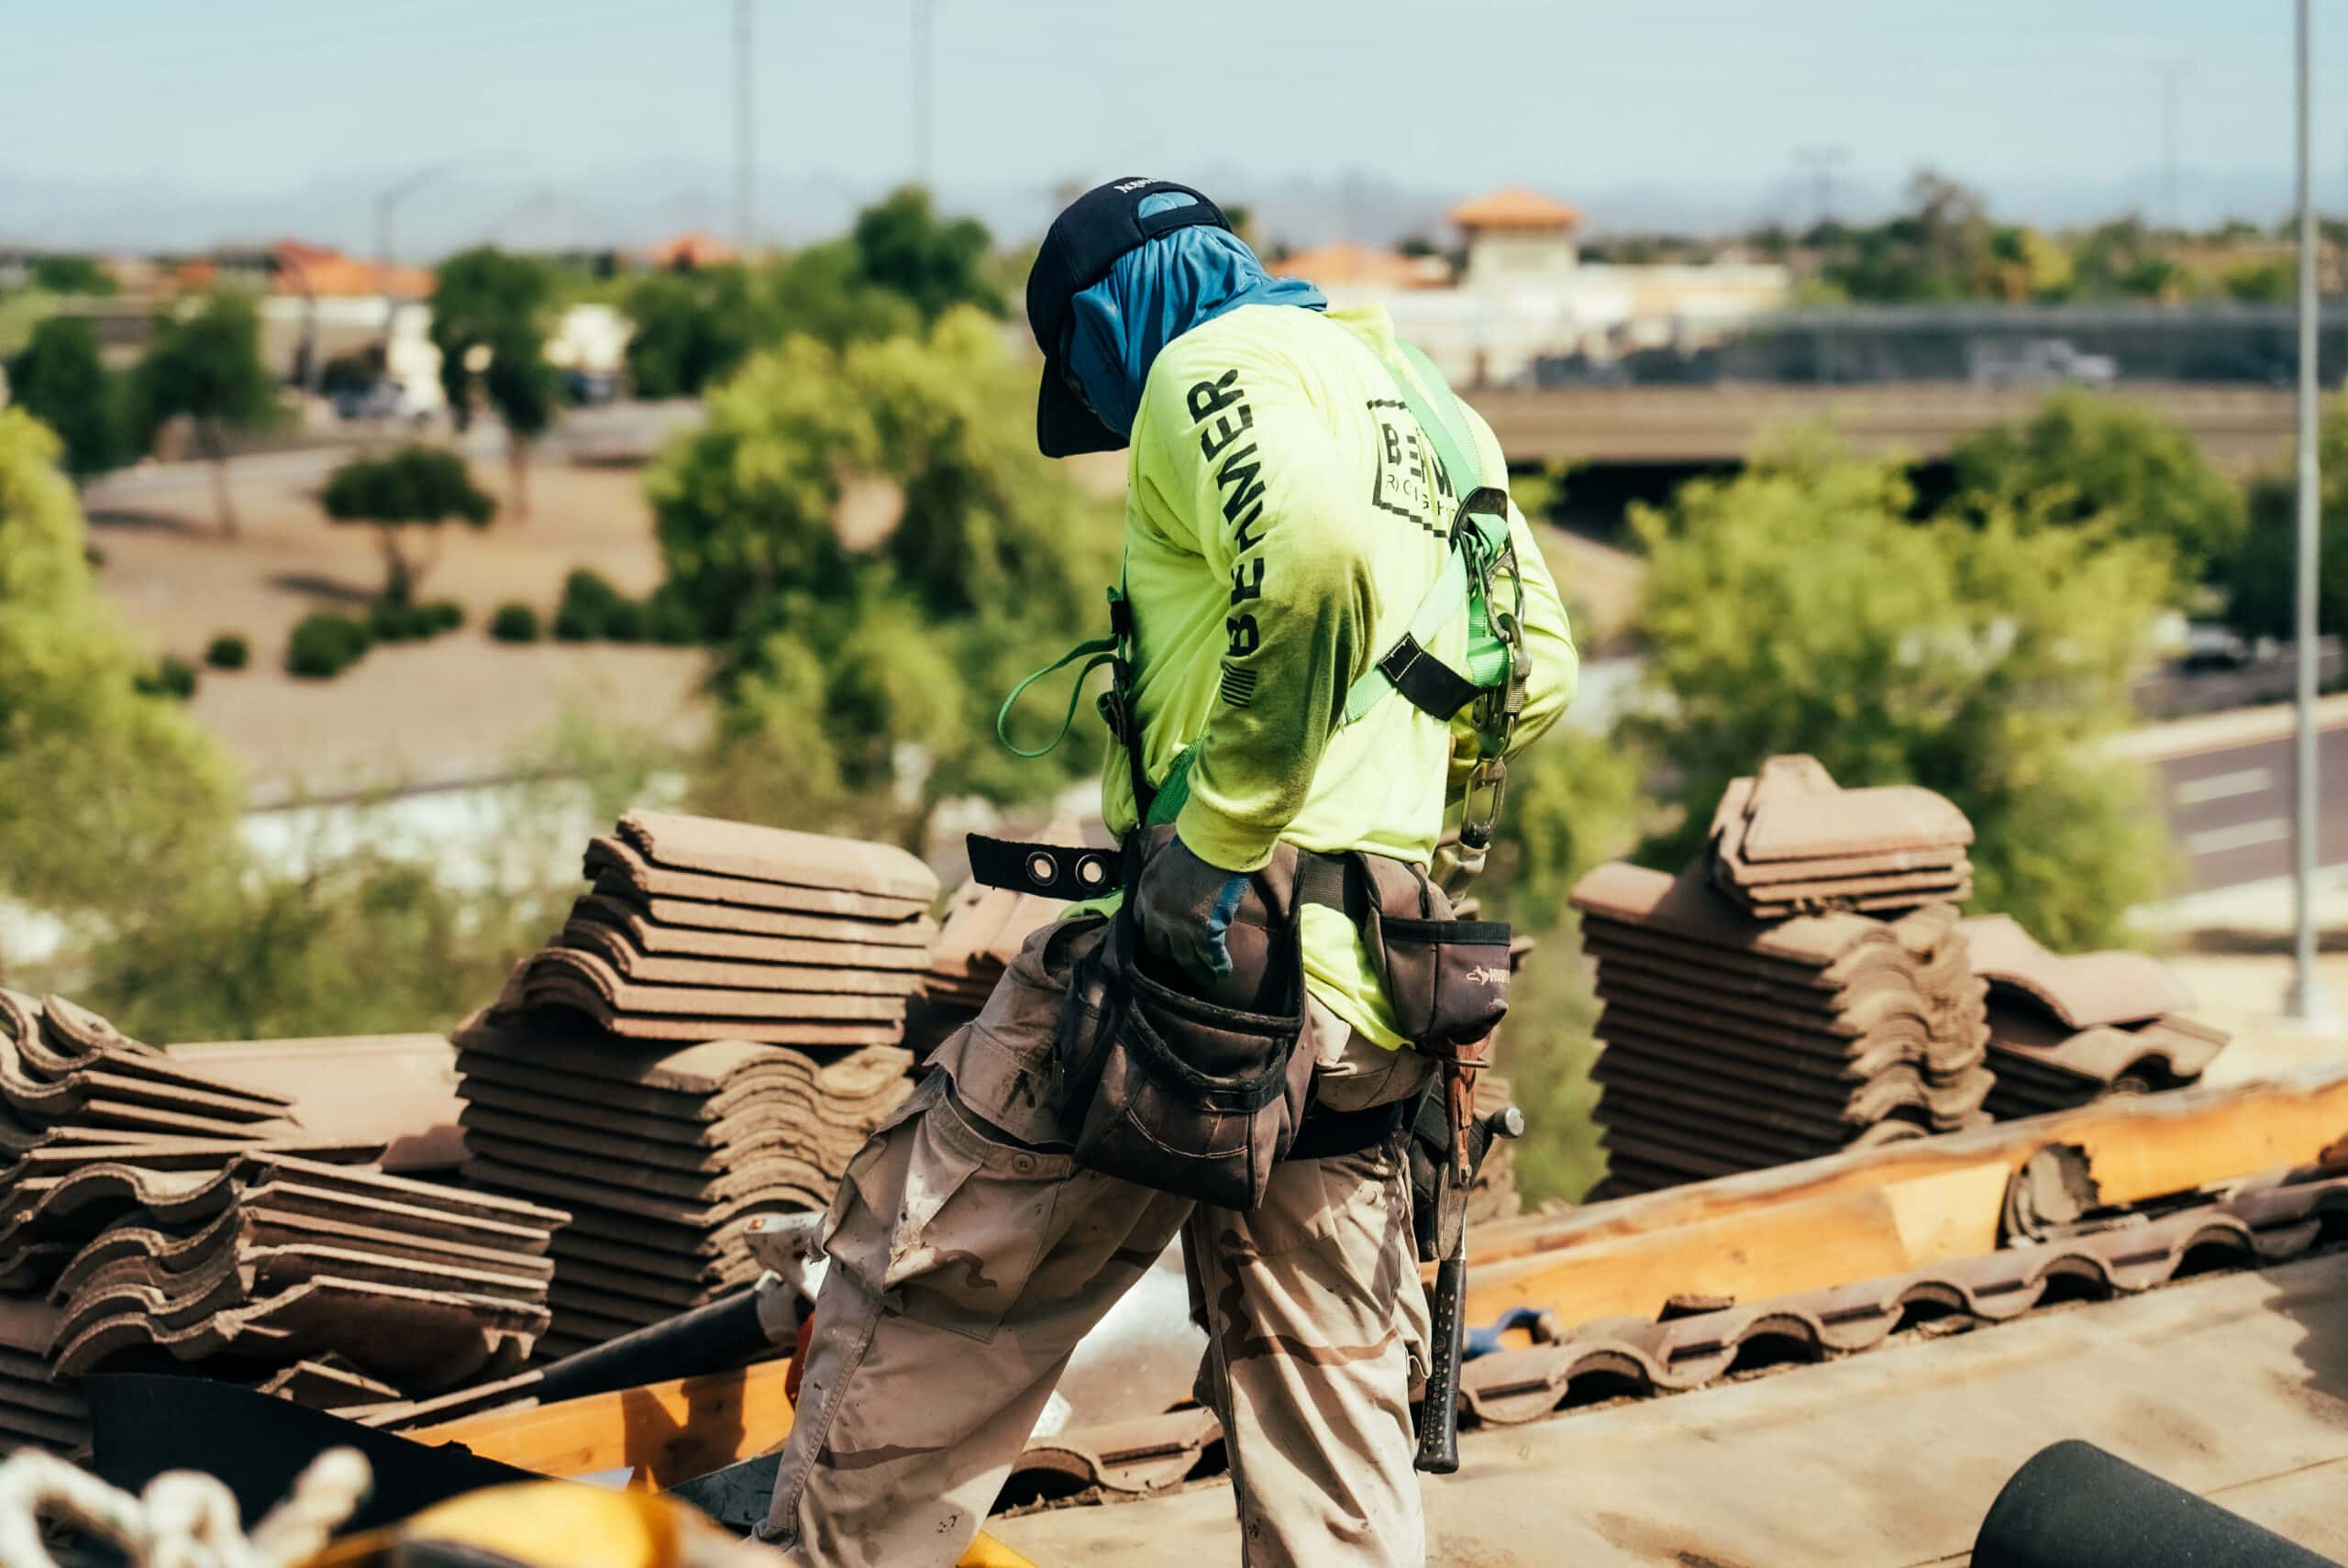 Behmer roofing team member meticulously working on a tile re-felt in Ironwood Village, Scottsdale.